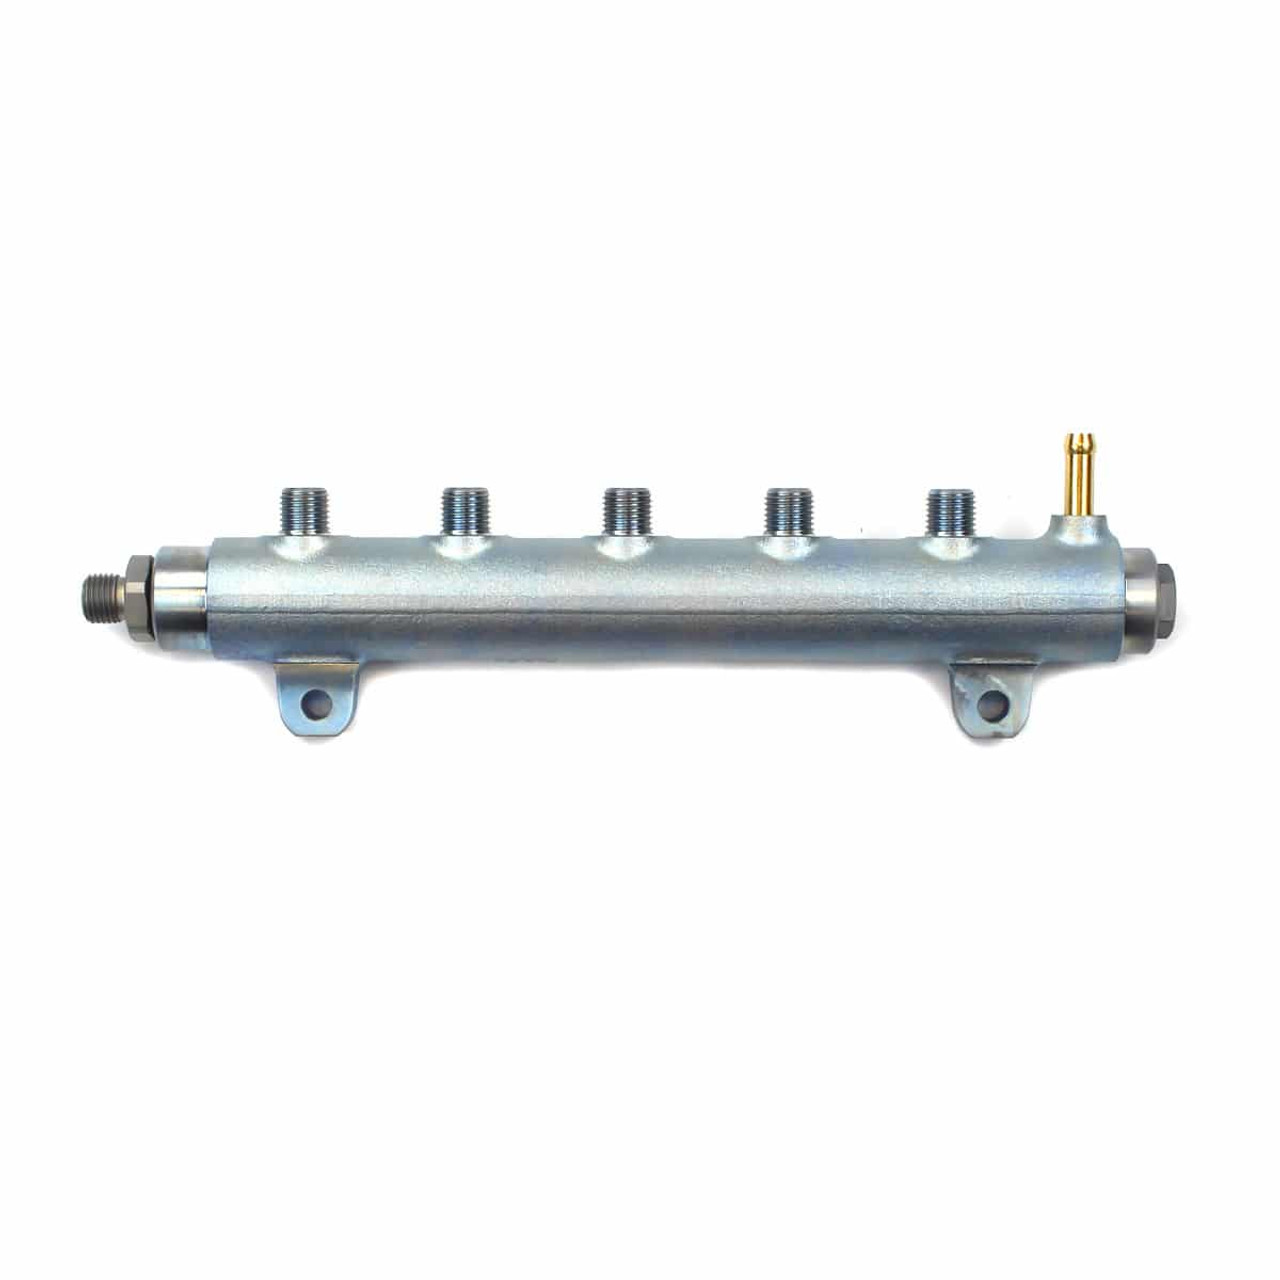  Industrial Injection Fuel Rail Left Hand for 2004.5 to 2006 LLY 6.6L Duramax (F00R001505)New View